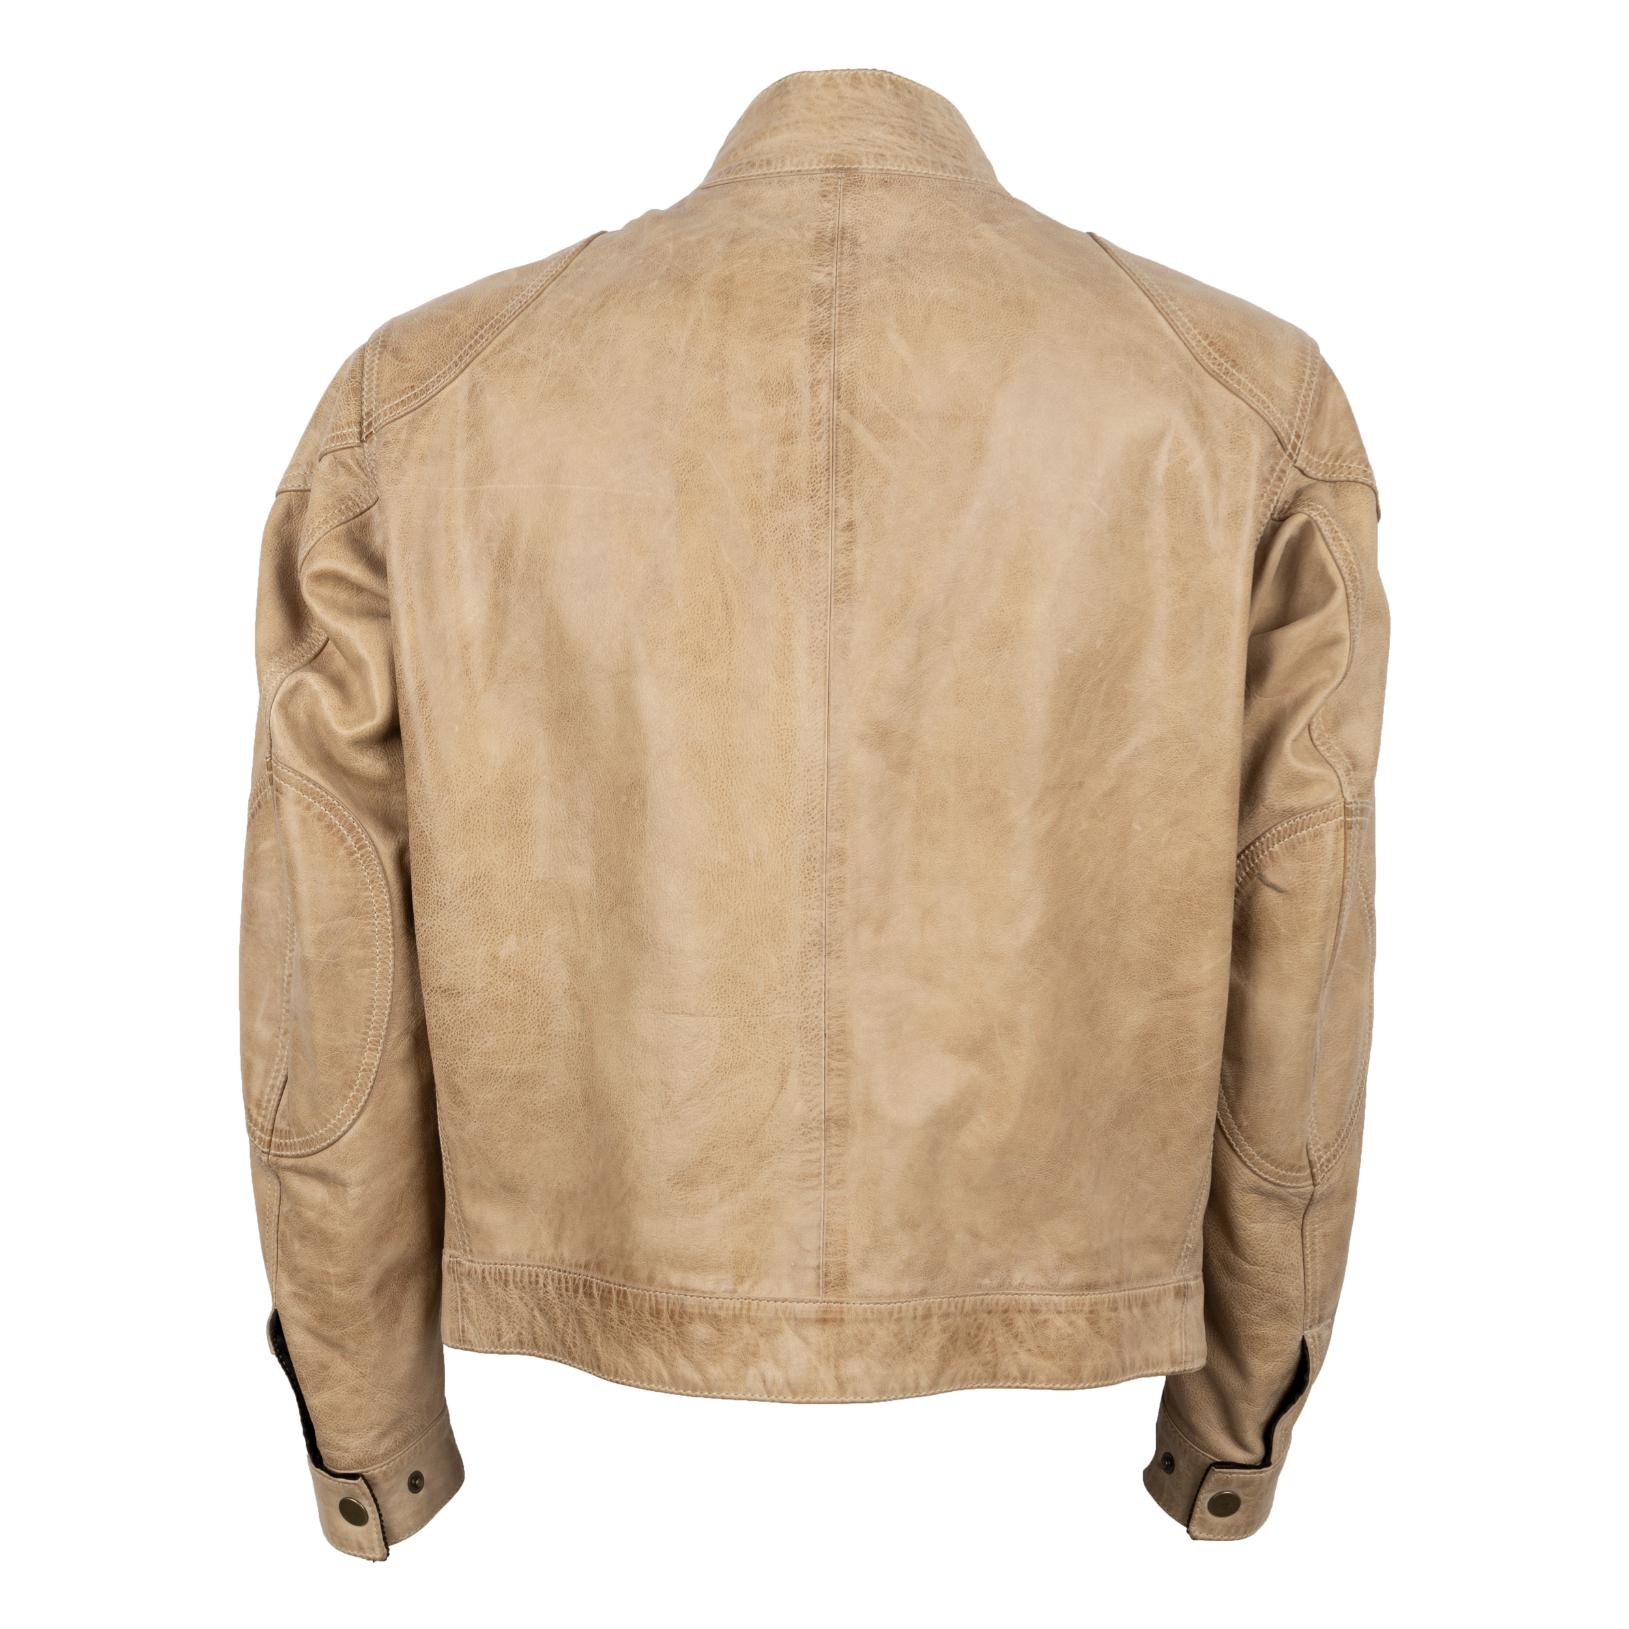 The Belstaff vintage Gangster Jacket in beige color is a classic piece of outerwear that features a stylish and timeless design. This jacket is made from high-quality leather, which provides both durability and a comfortable fit. It features a front